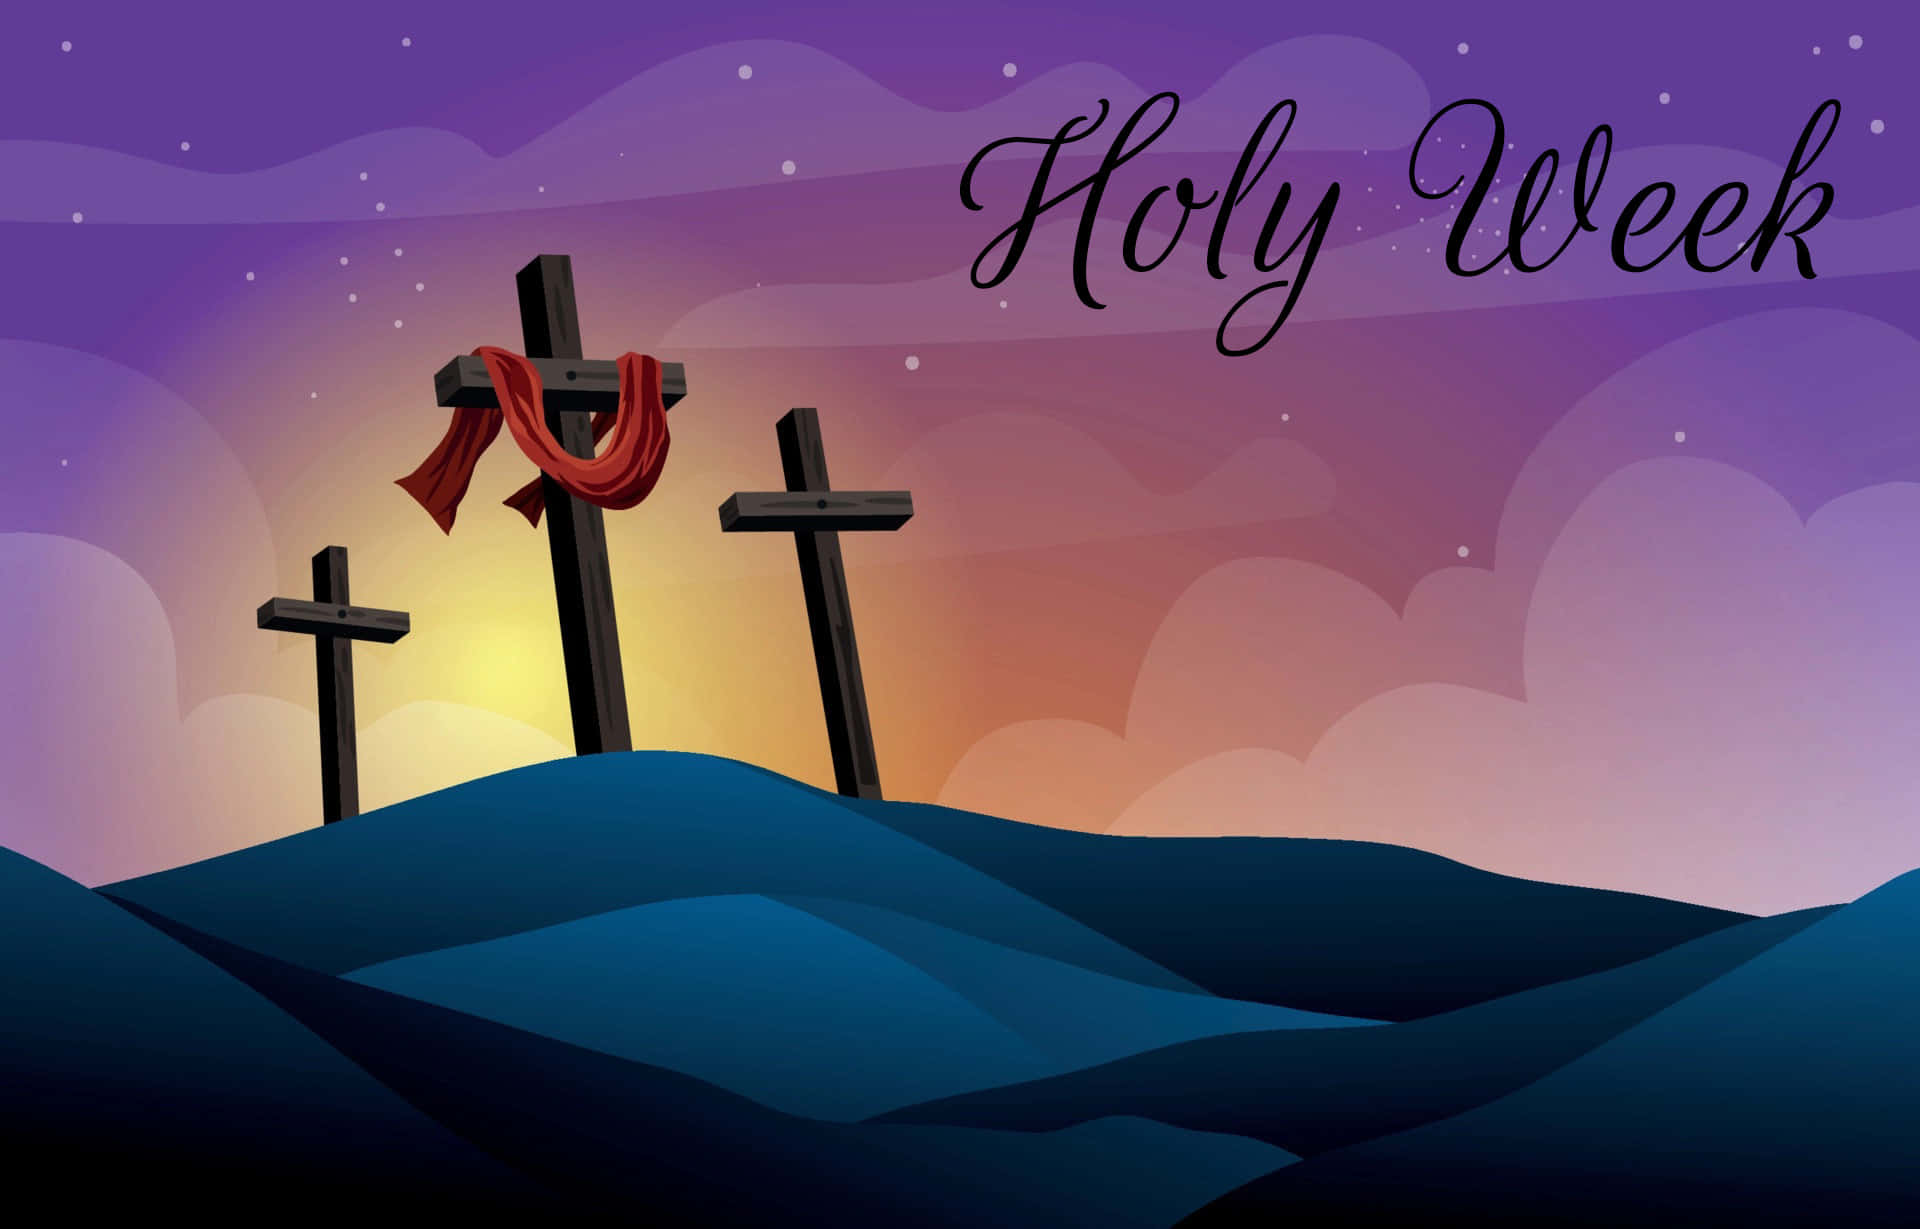 Holy Week With Crosses And A Red Cross Wallpaper